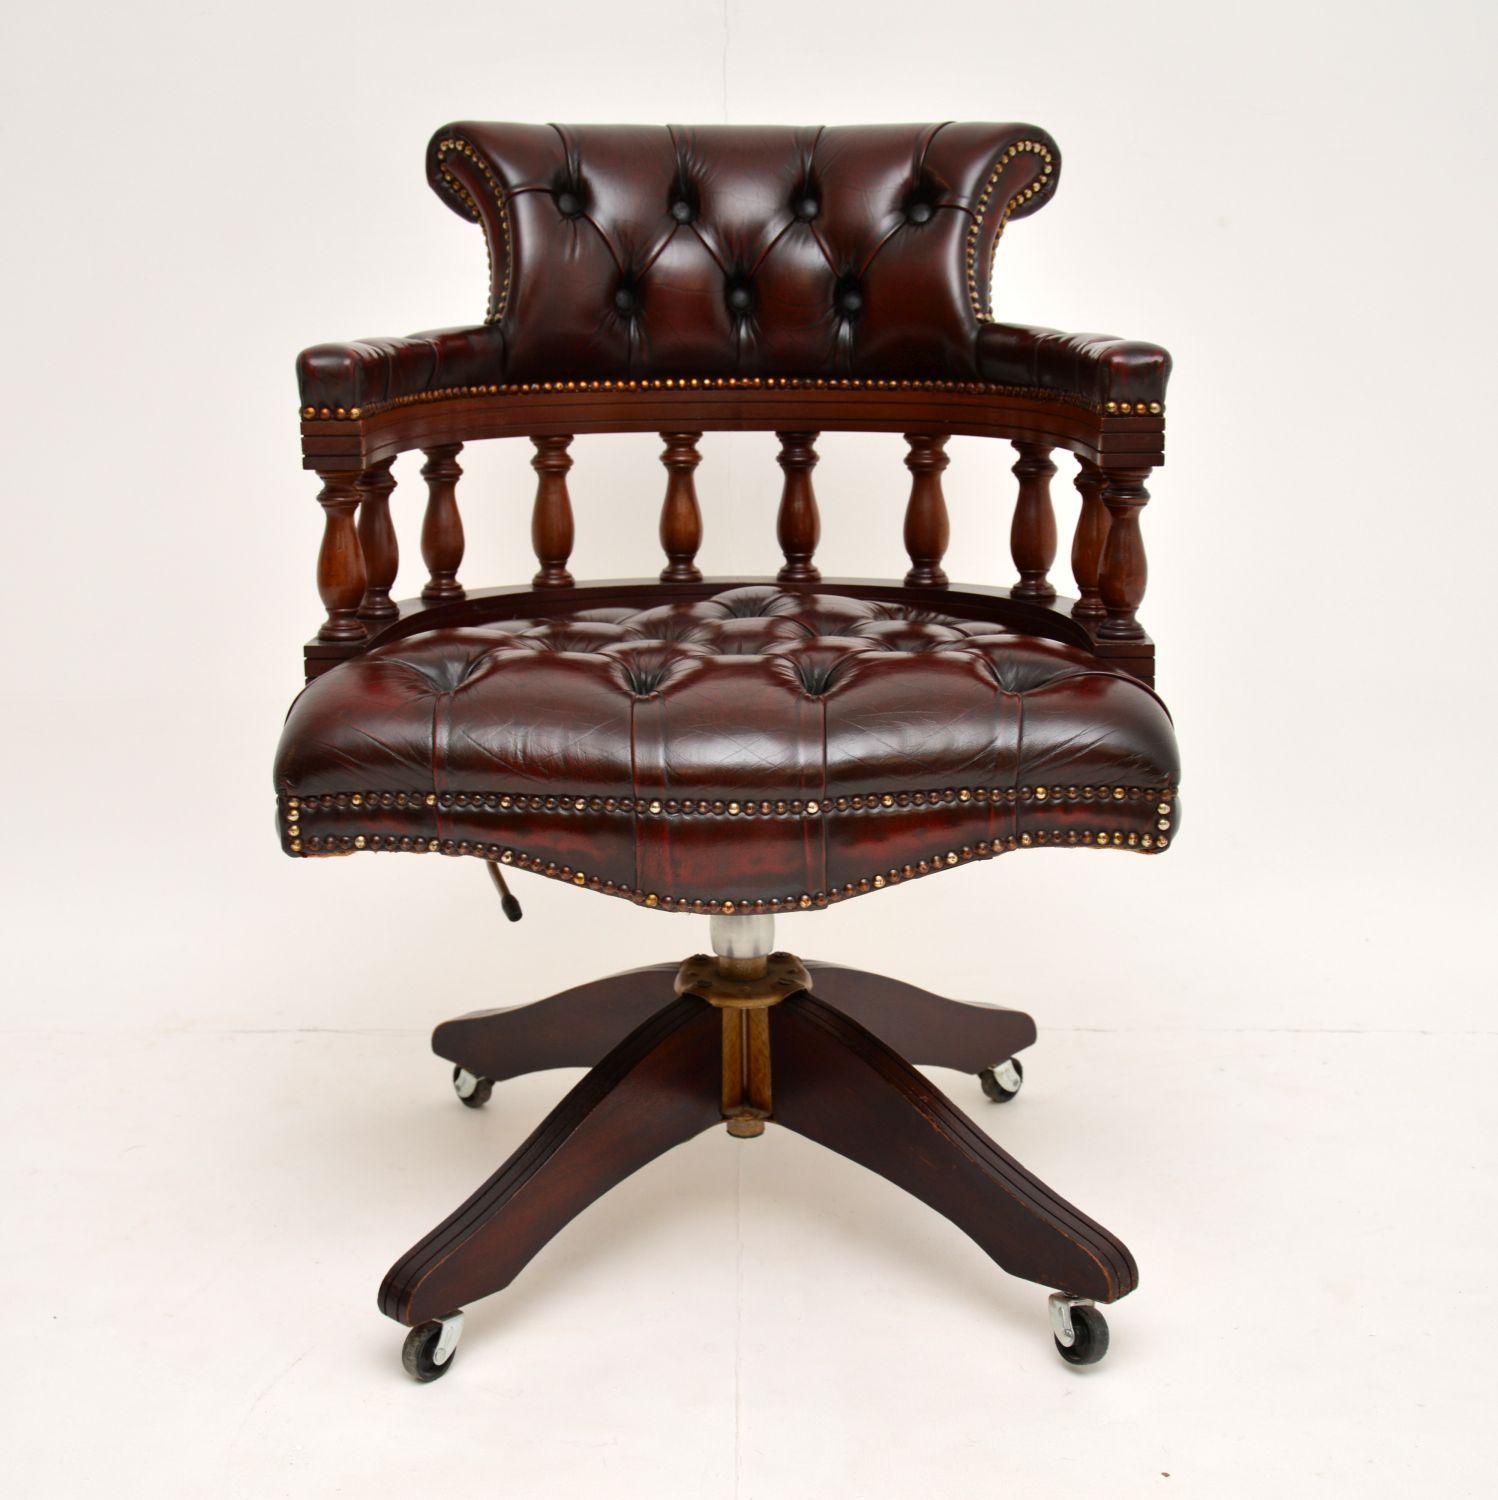 A handsome and top quality vintage deep buttoned leather desk chair in the antique Victorian style. This dates from the 1950s-1960s, it’s in great condition for its age.

We have just had this revived and hand colored by our leather restorer. The